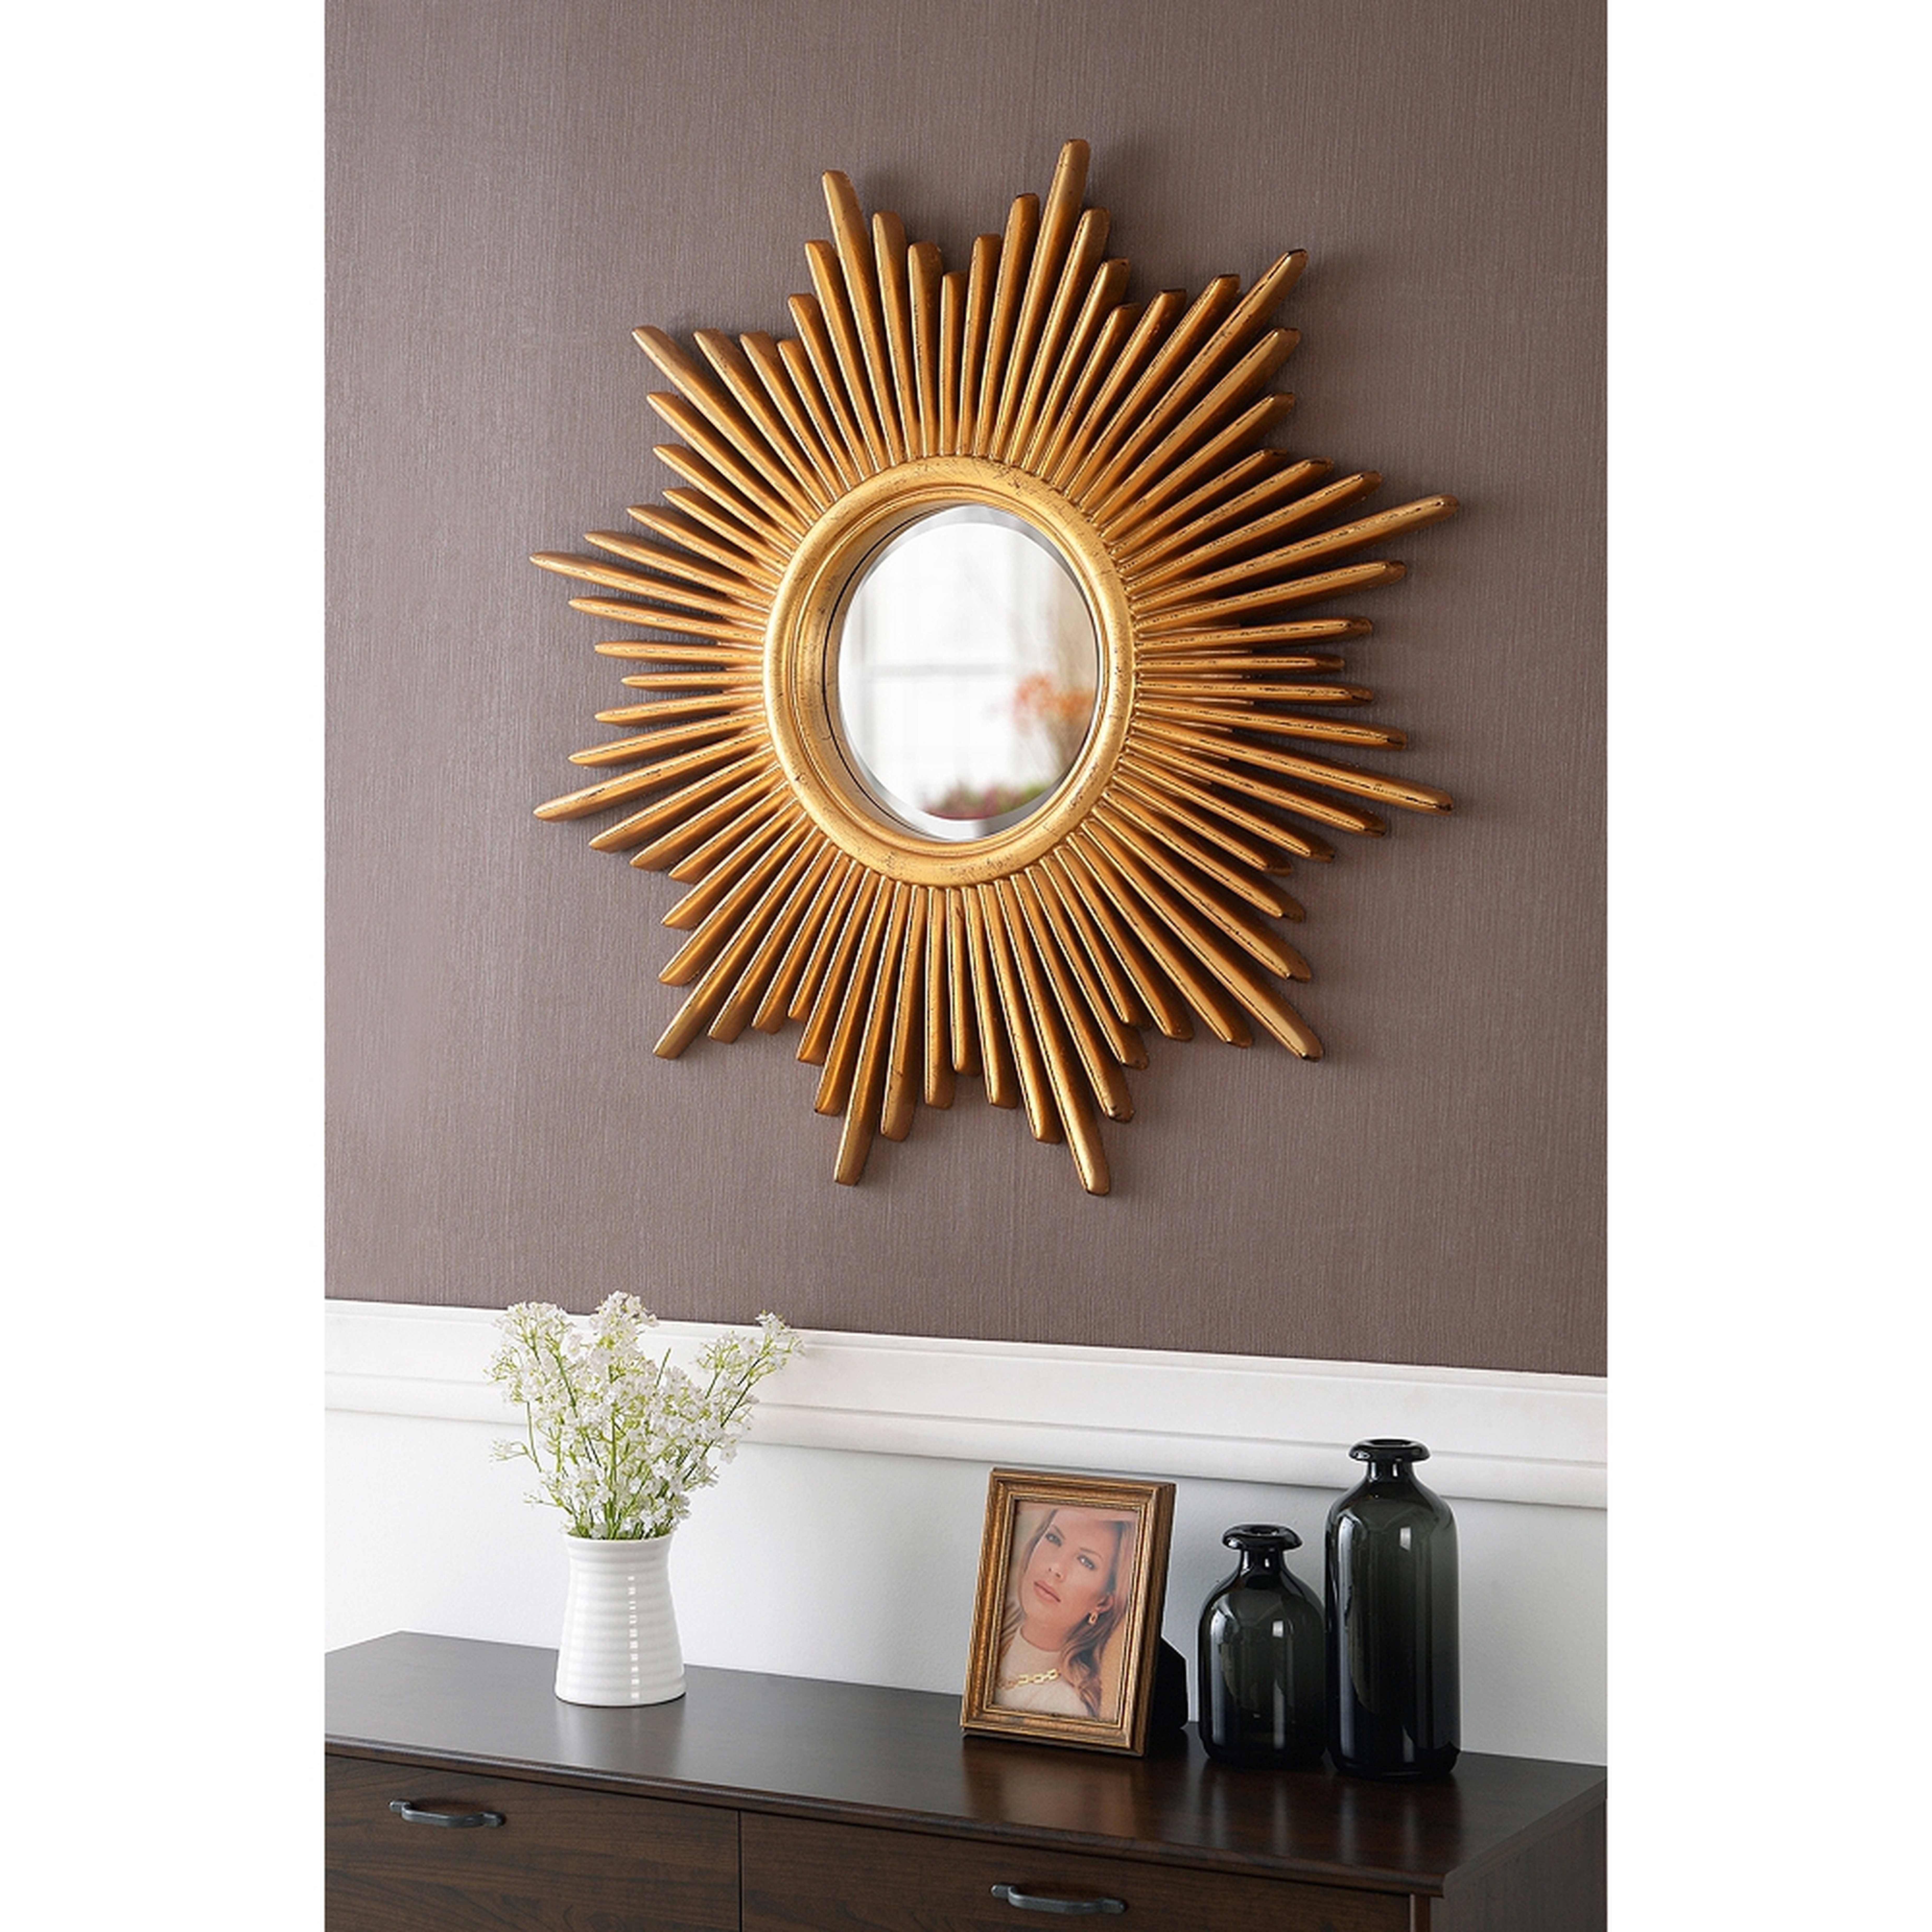 Kenroy Home Reyes Antique Gold 36" Round Wall Mirror - Style # 83J16 - Lamps Plus